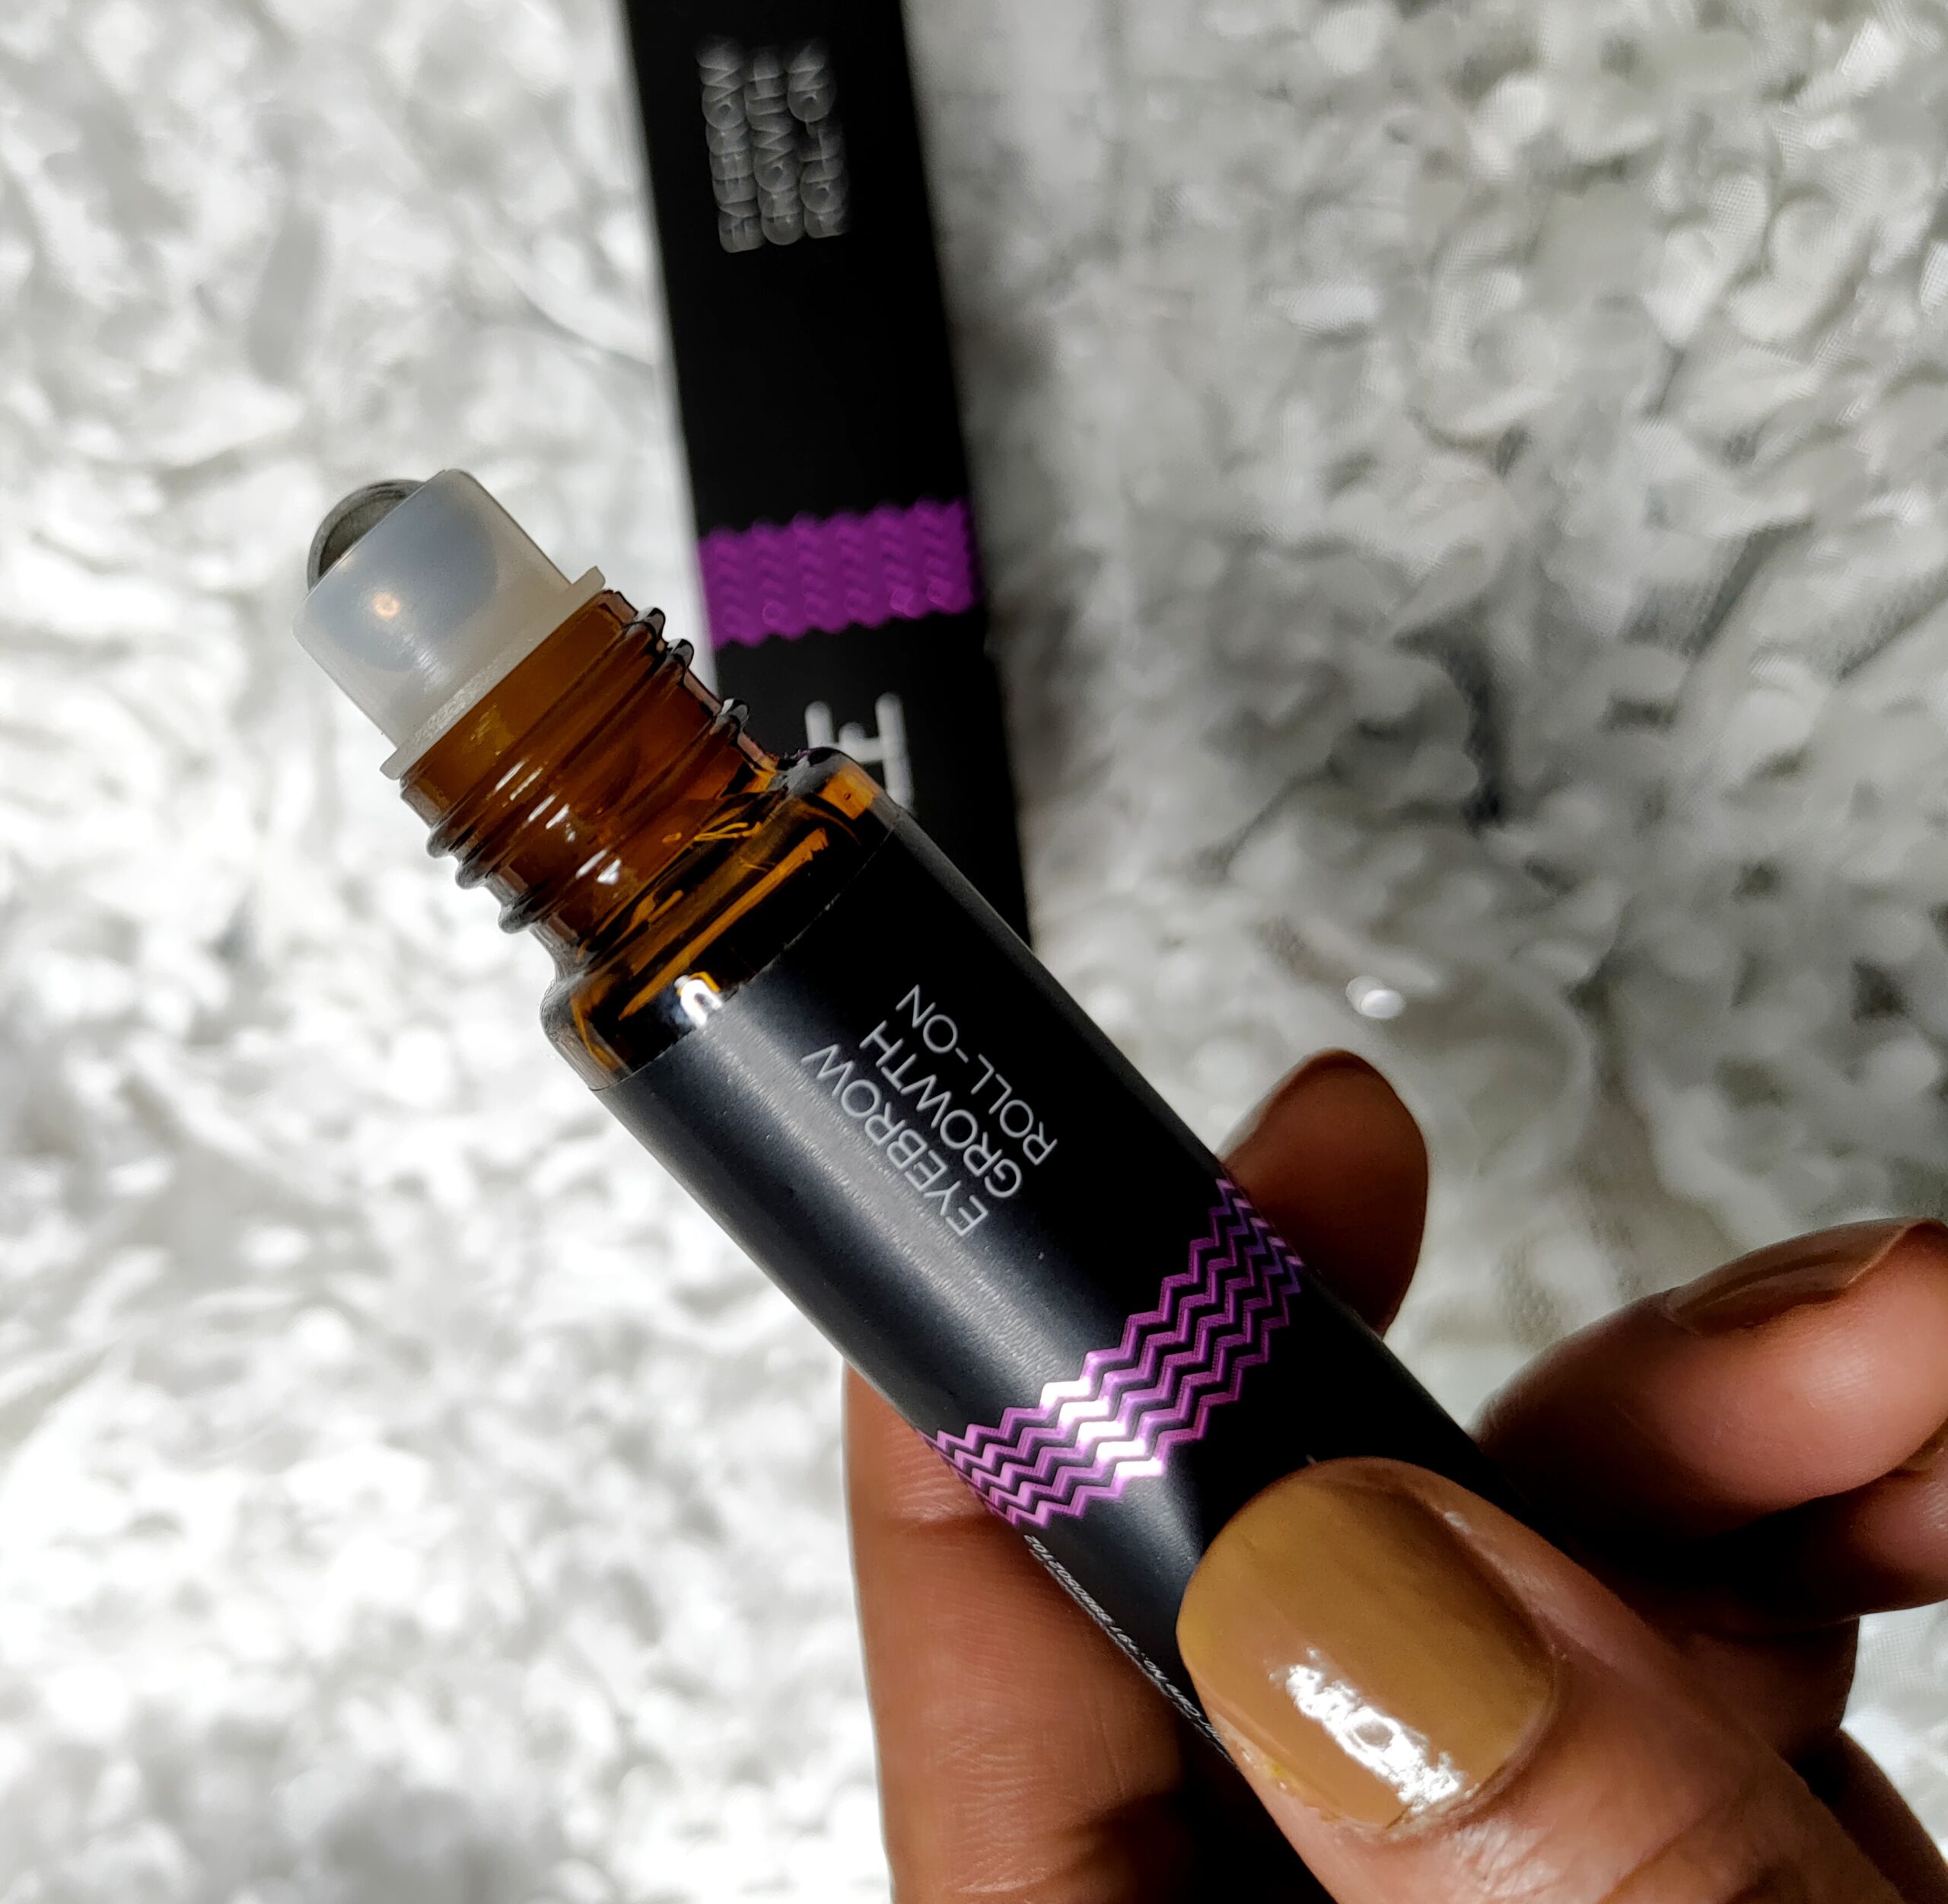 Renee Eyebrow Growth Roll-On Review